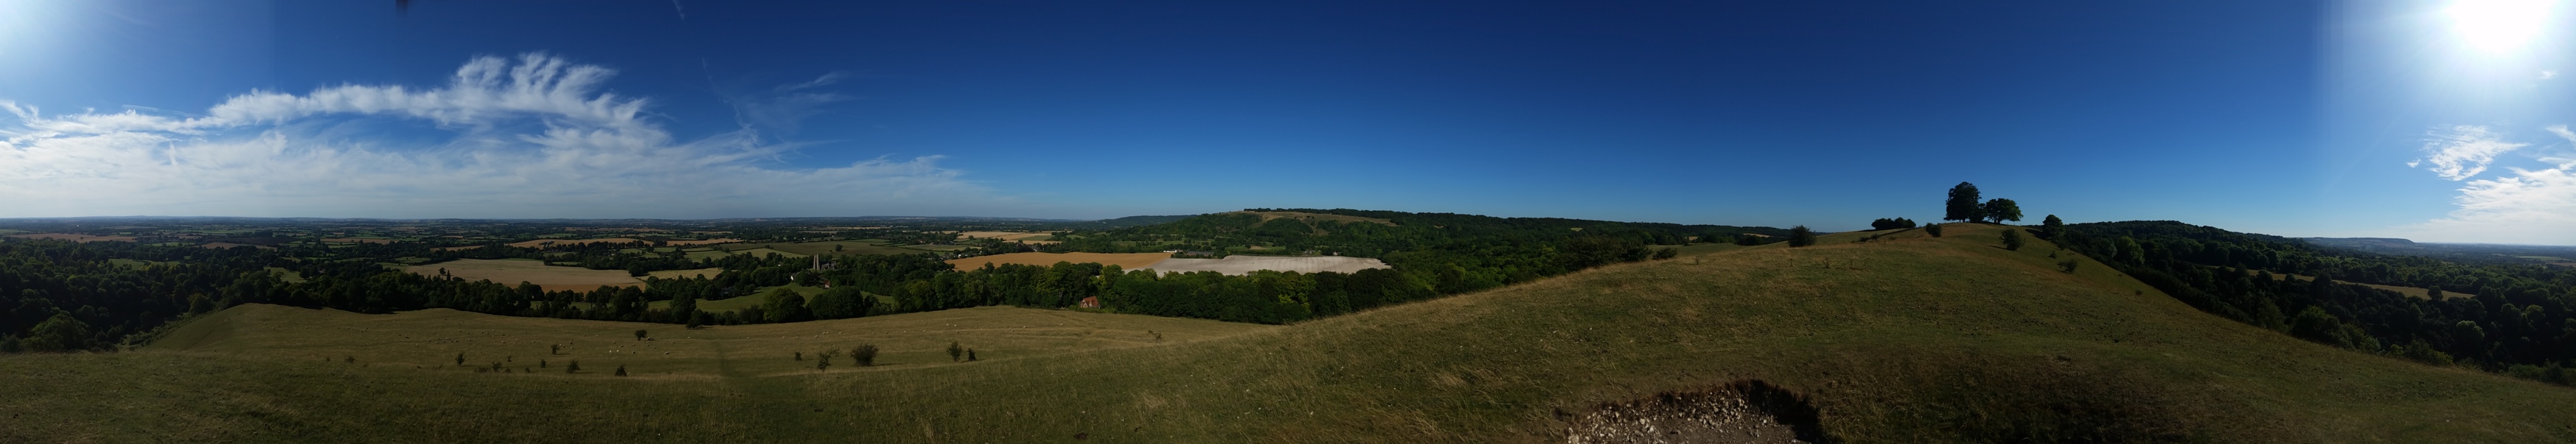 Samsung Galaxy S5 panorama mode Coombe Hill in Chiltern Hills